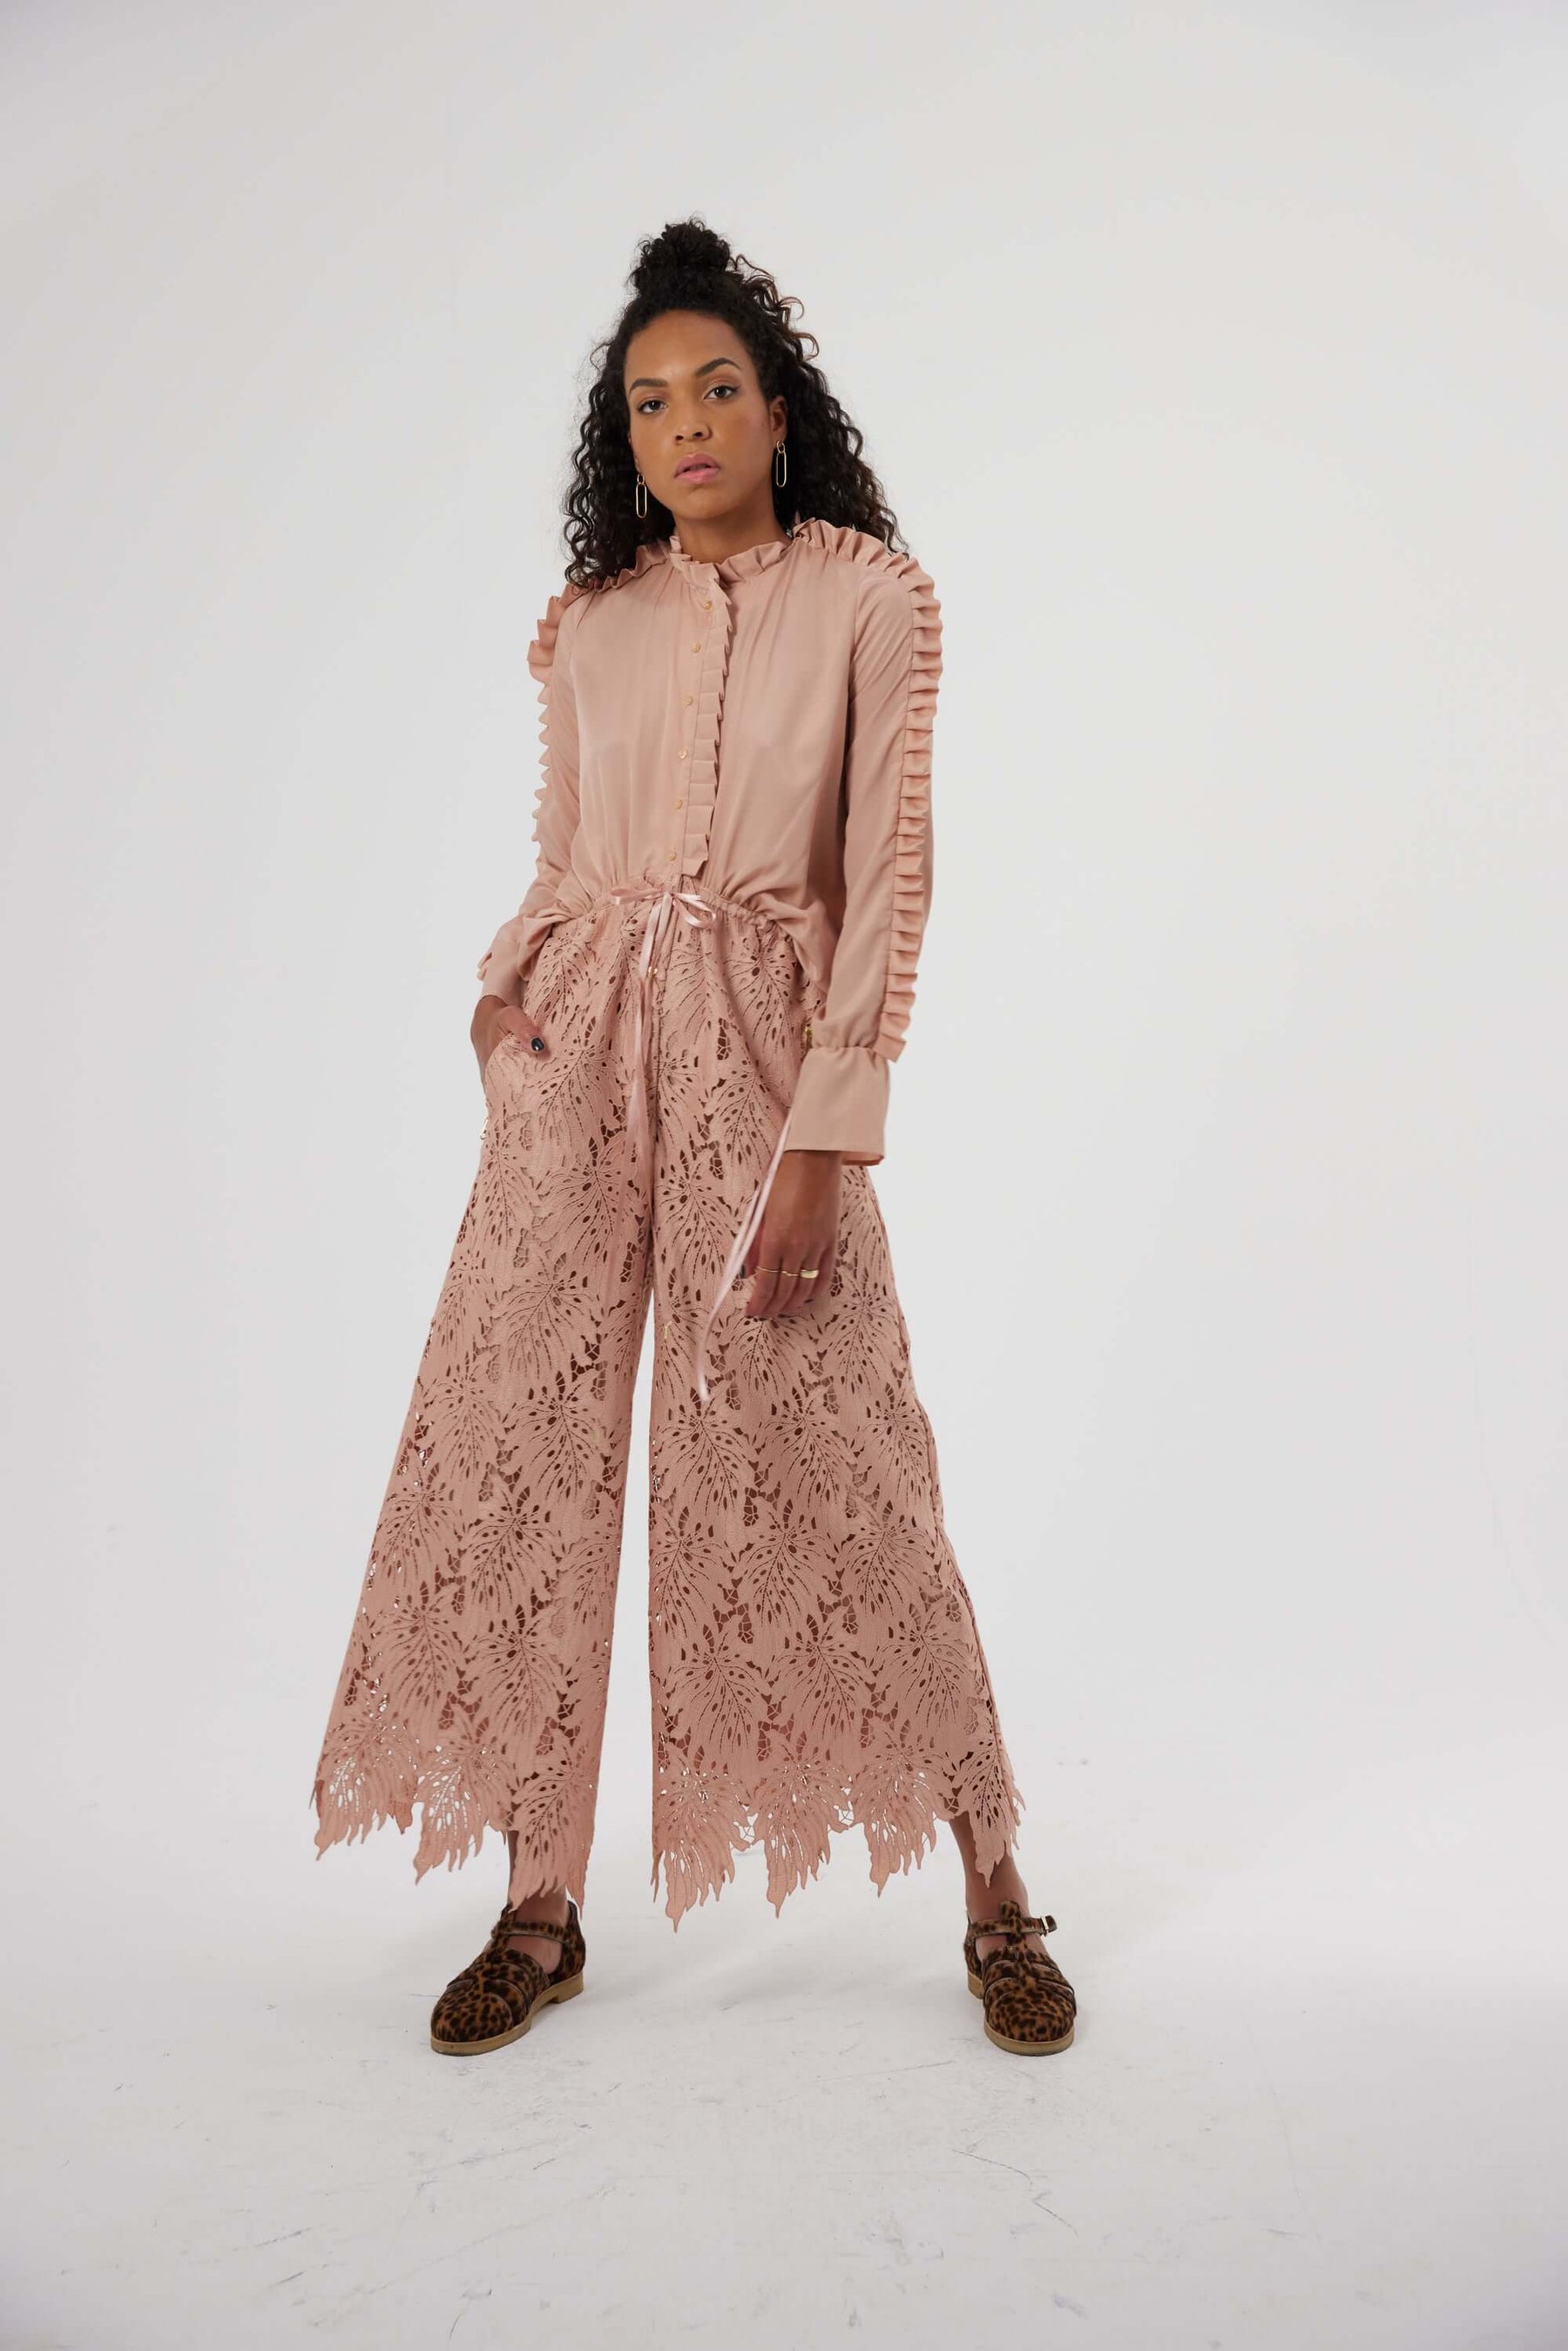 Gil jumpsuit in Dust lace | Heimstone